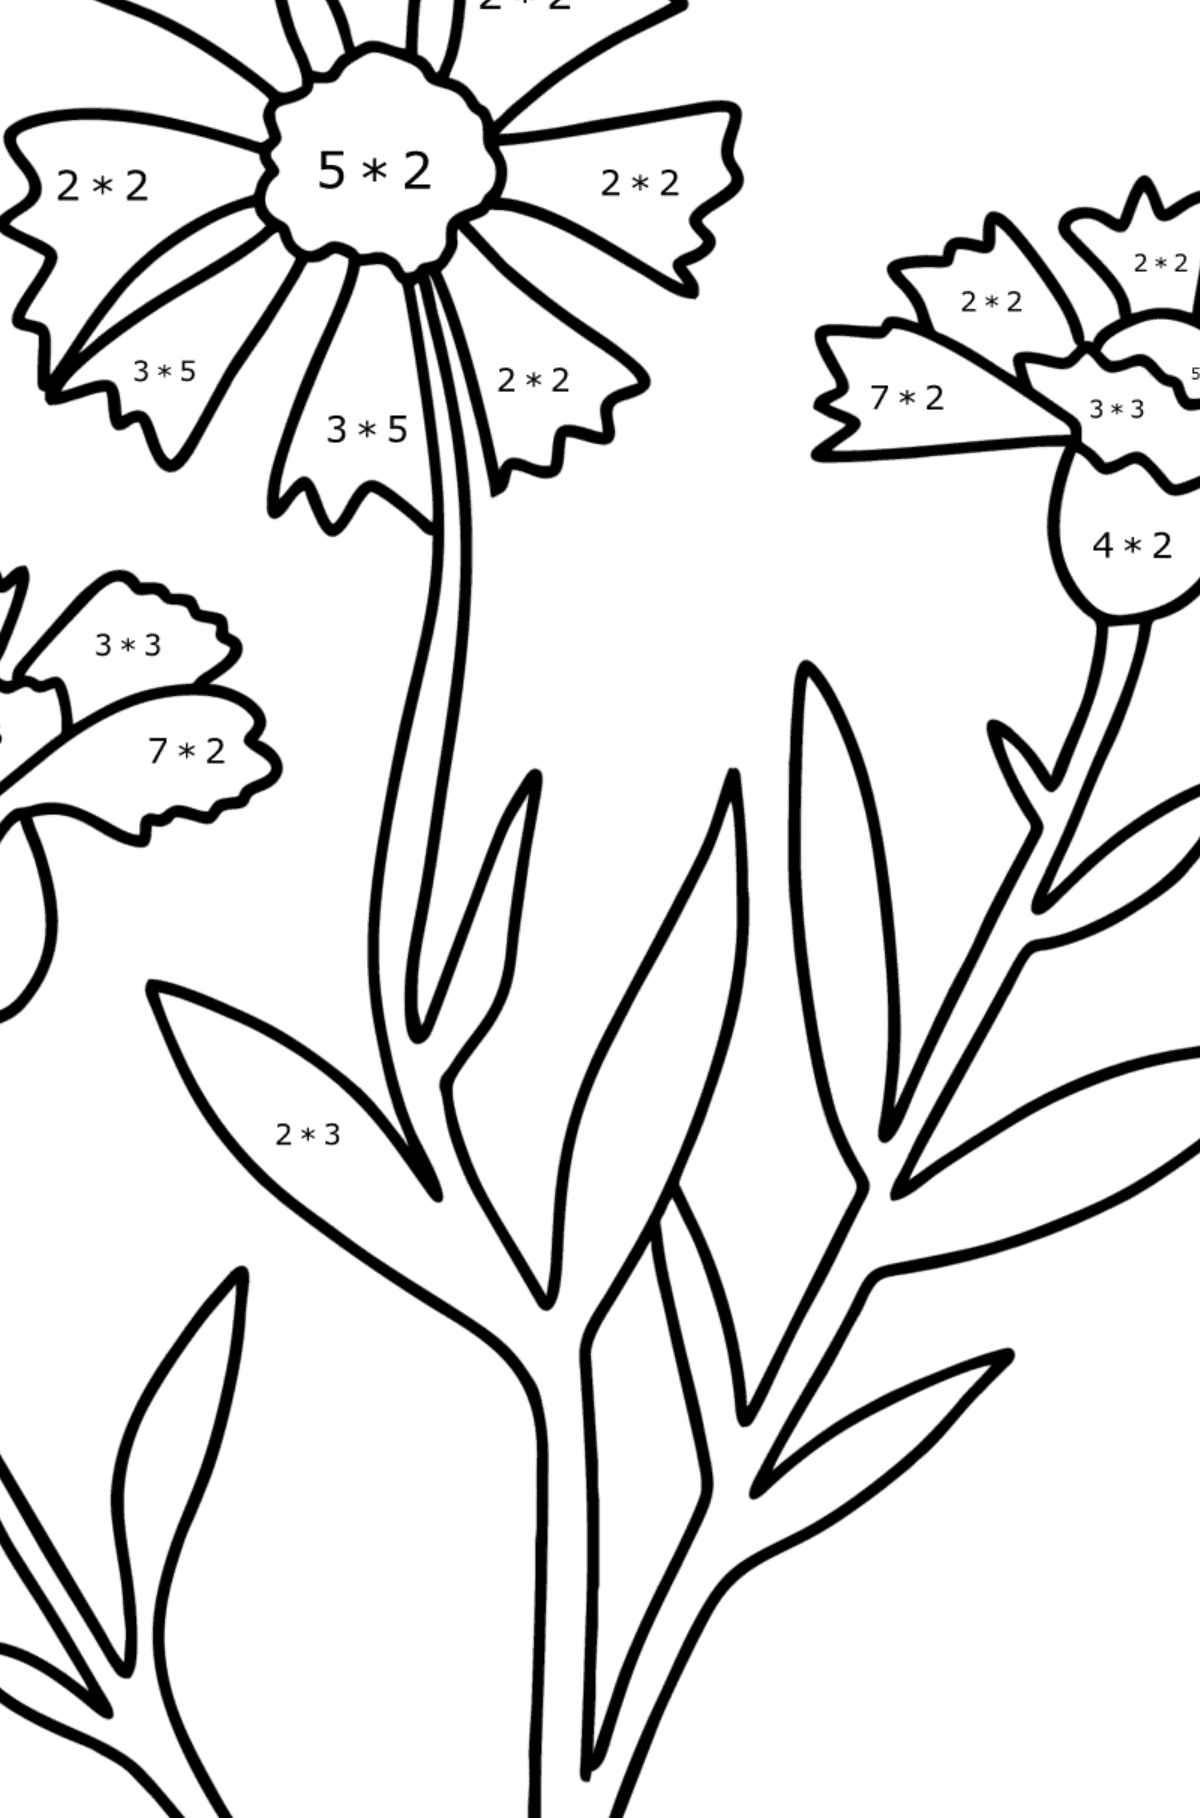 Knapweed coloring page - Math Coloring - Multiplication for Kids